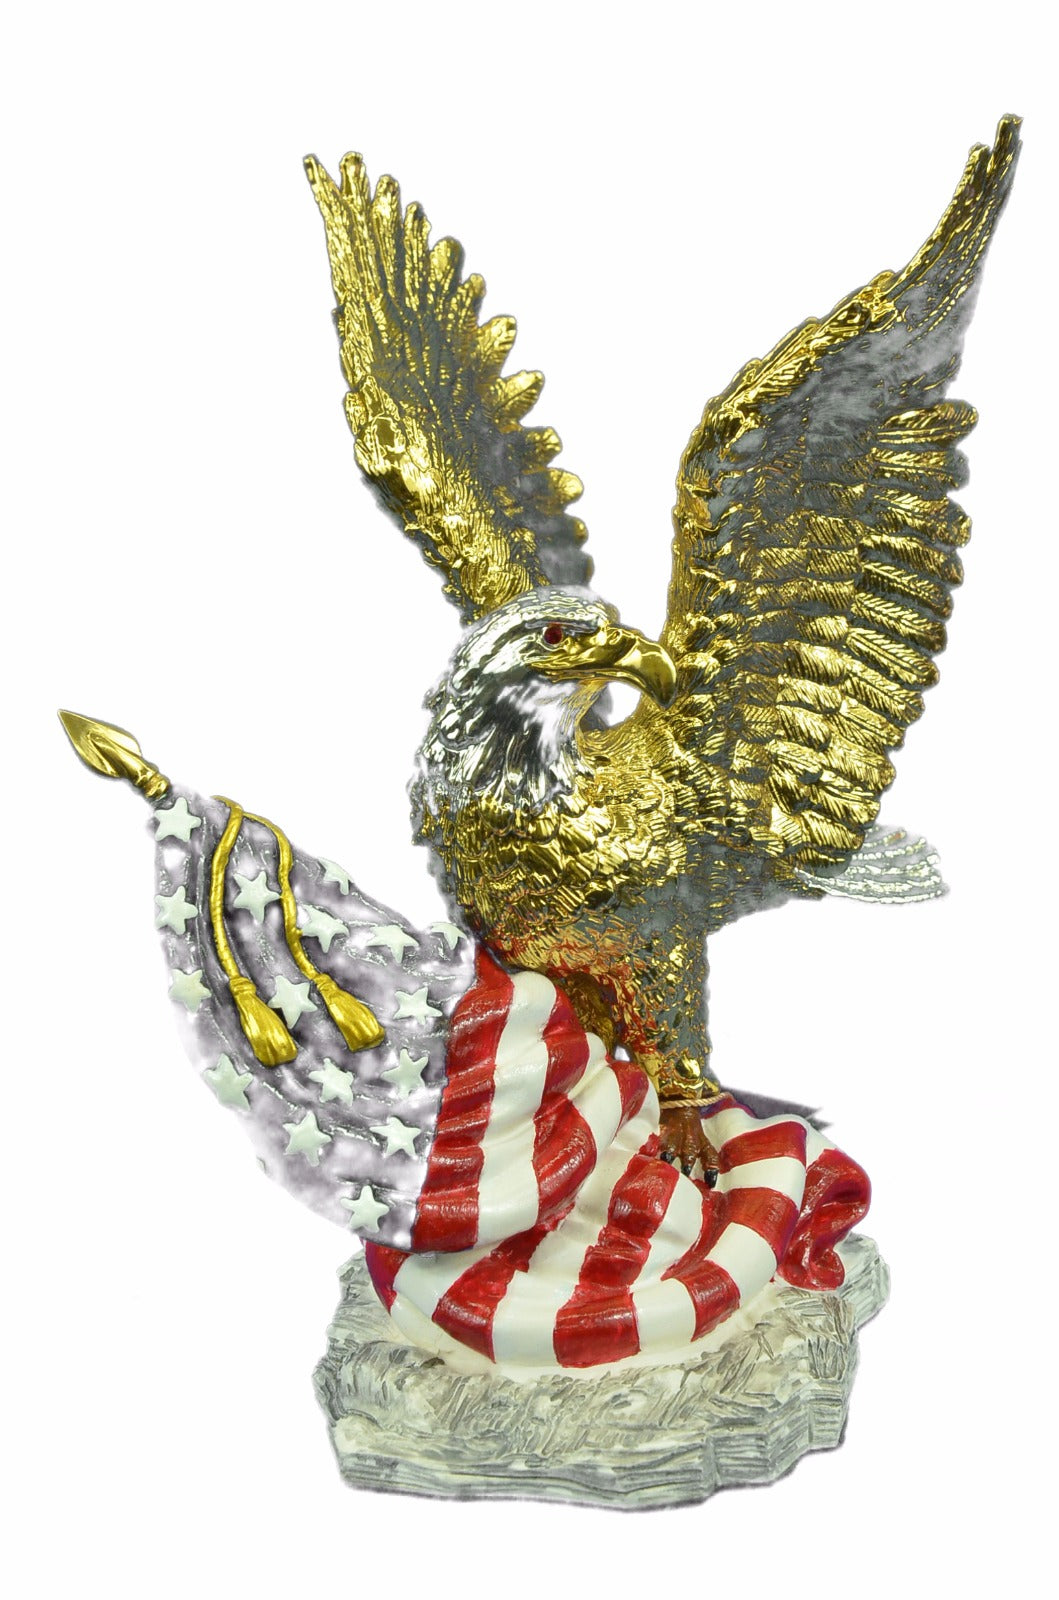 24K Gold Covered Bronze American Eagle with YSA Flag Sculpture Figurine Figure